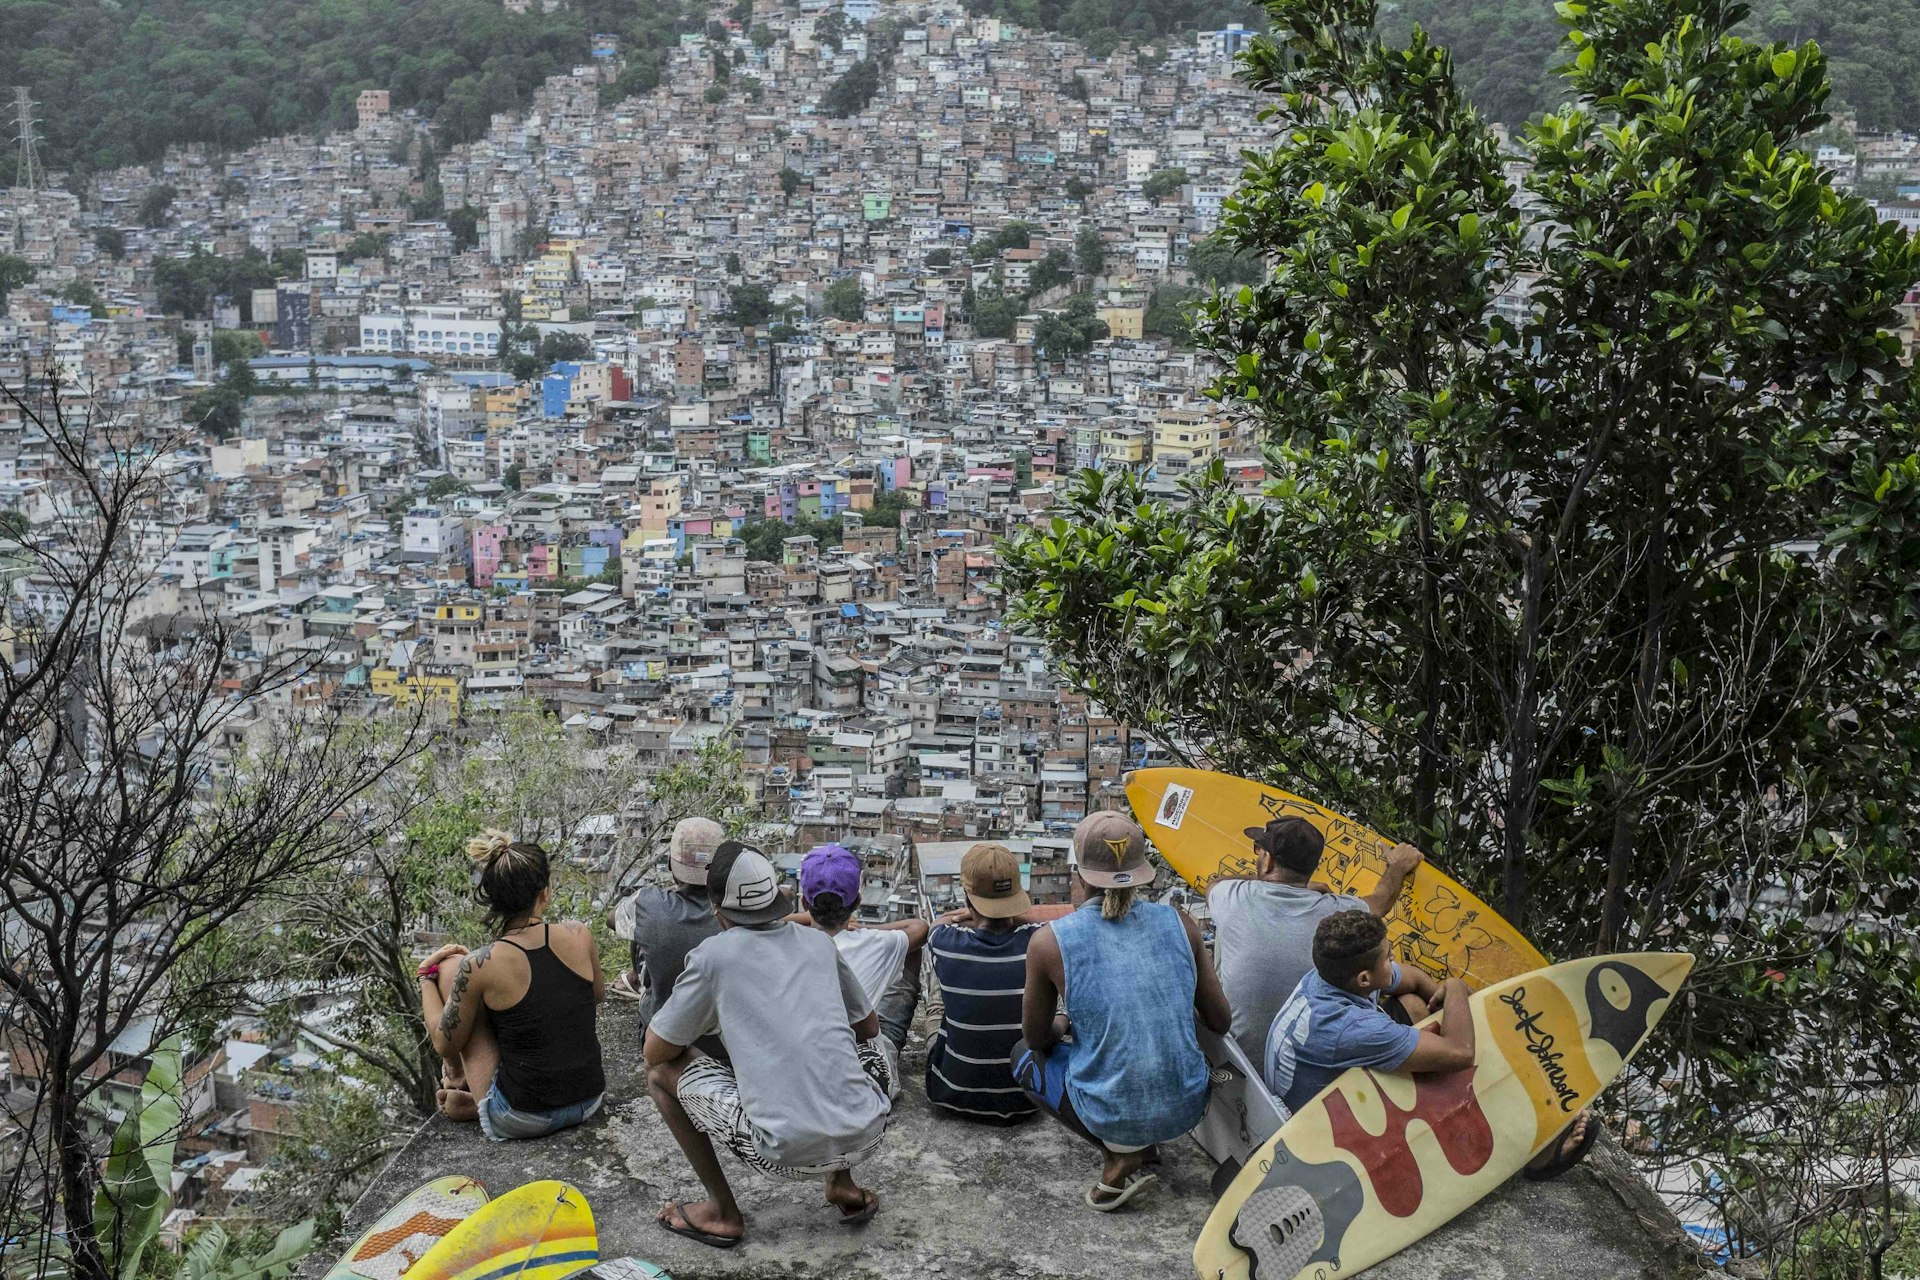 Looking out over Rocinha.